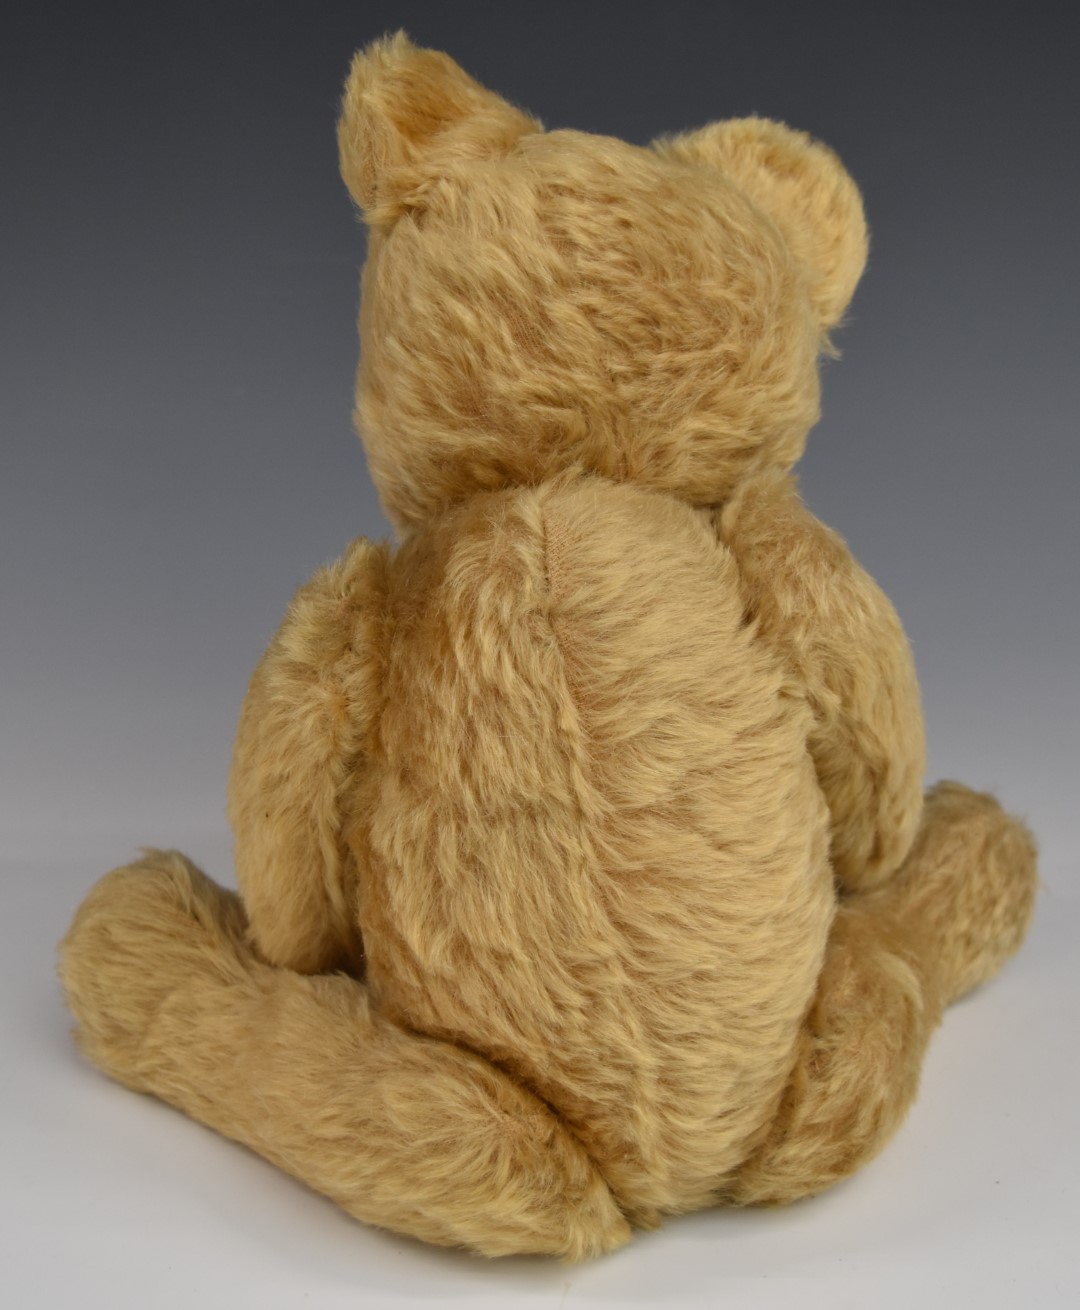 Farnell Alfa Teddy bear with blonde mohair, soft filling, disc joints, cloth pads, stitched features - Image 3 of 4